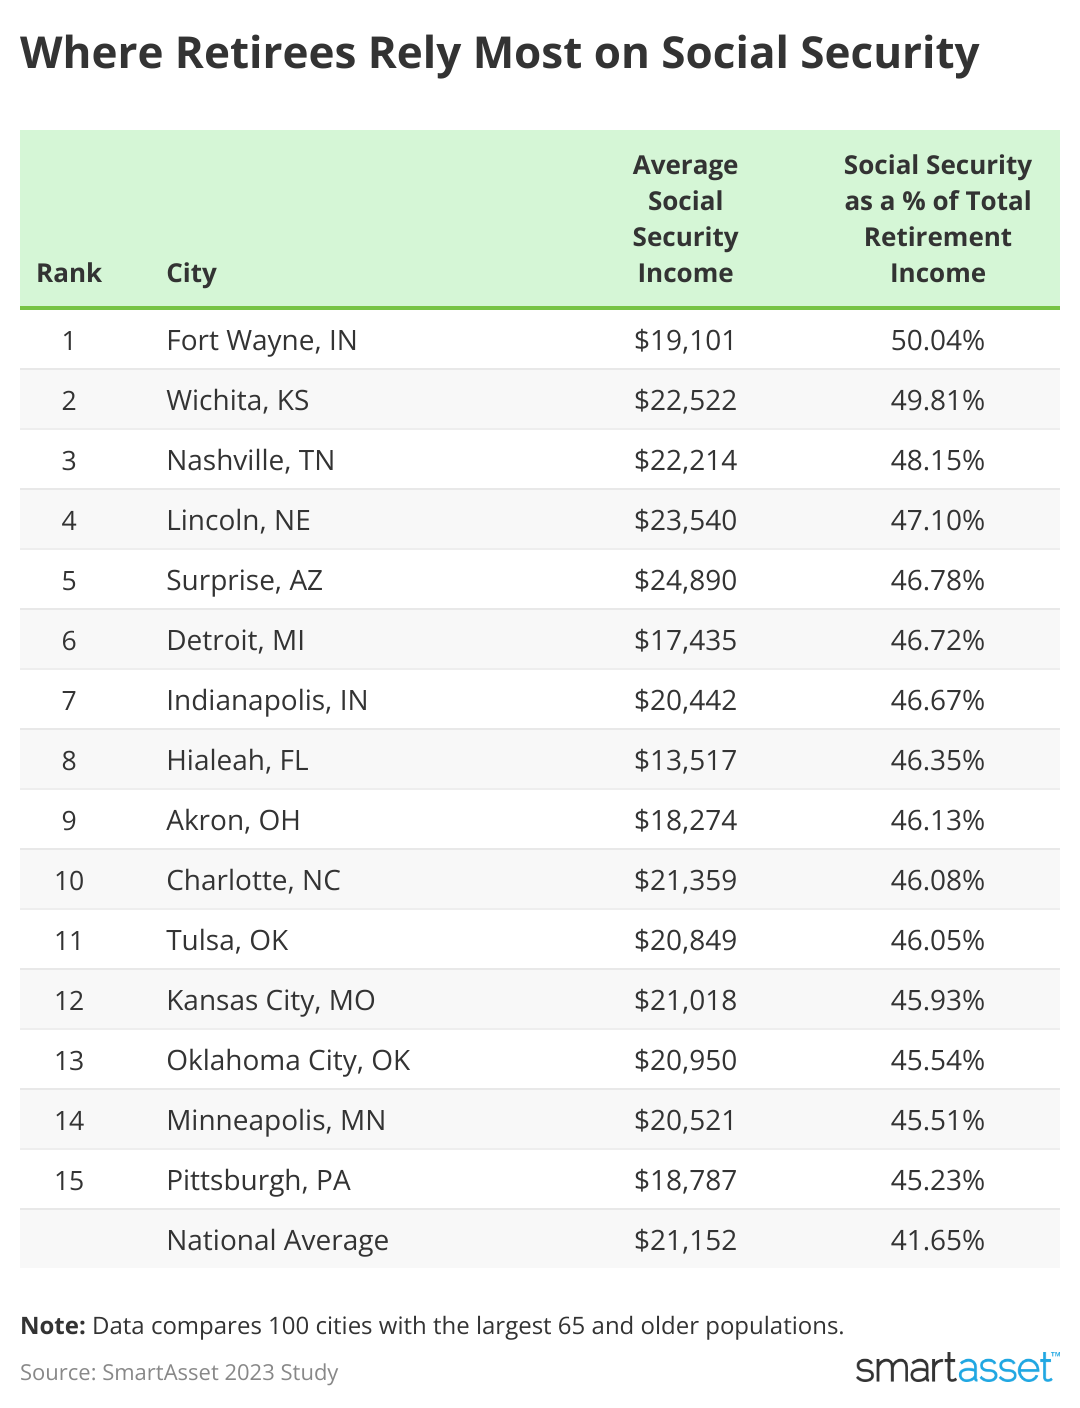 A table lists the 15 cities where retirees rely most on Social Security.